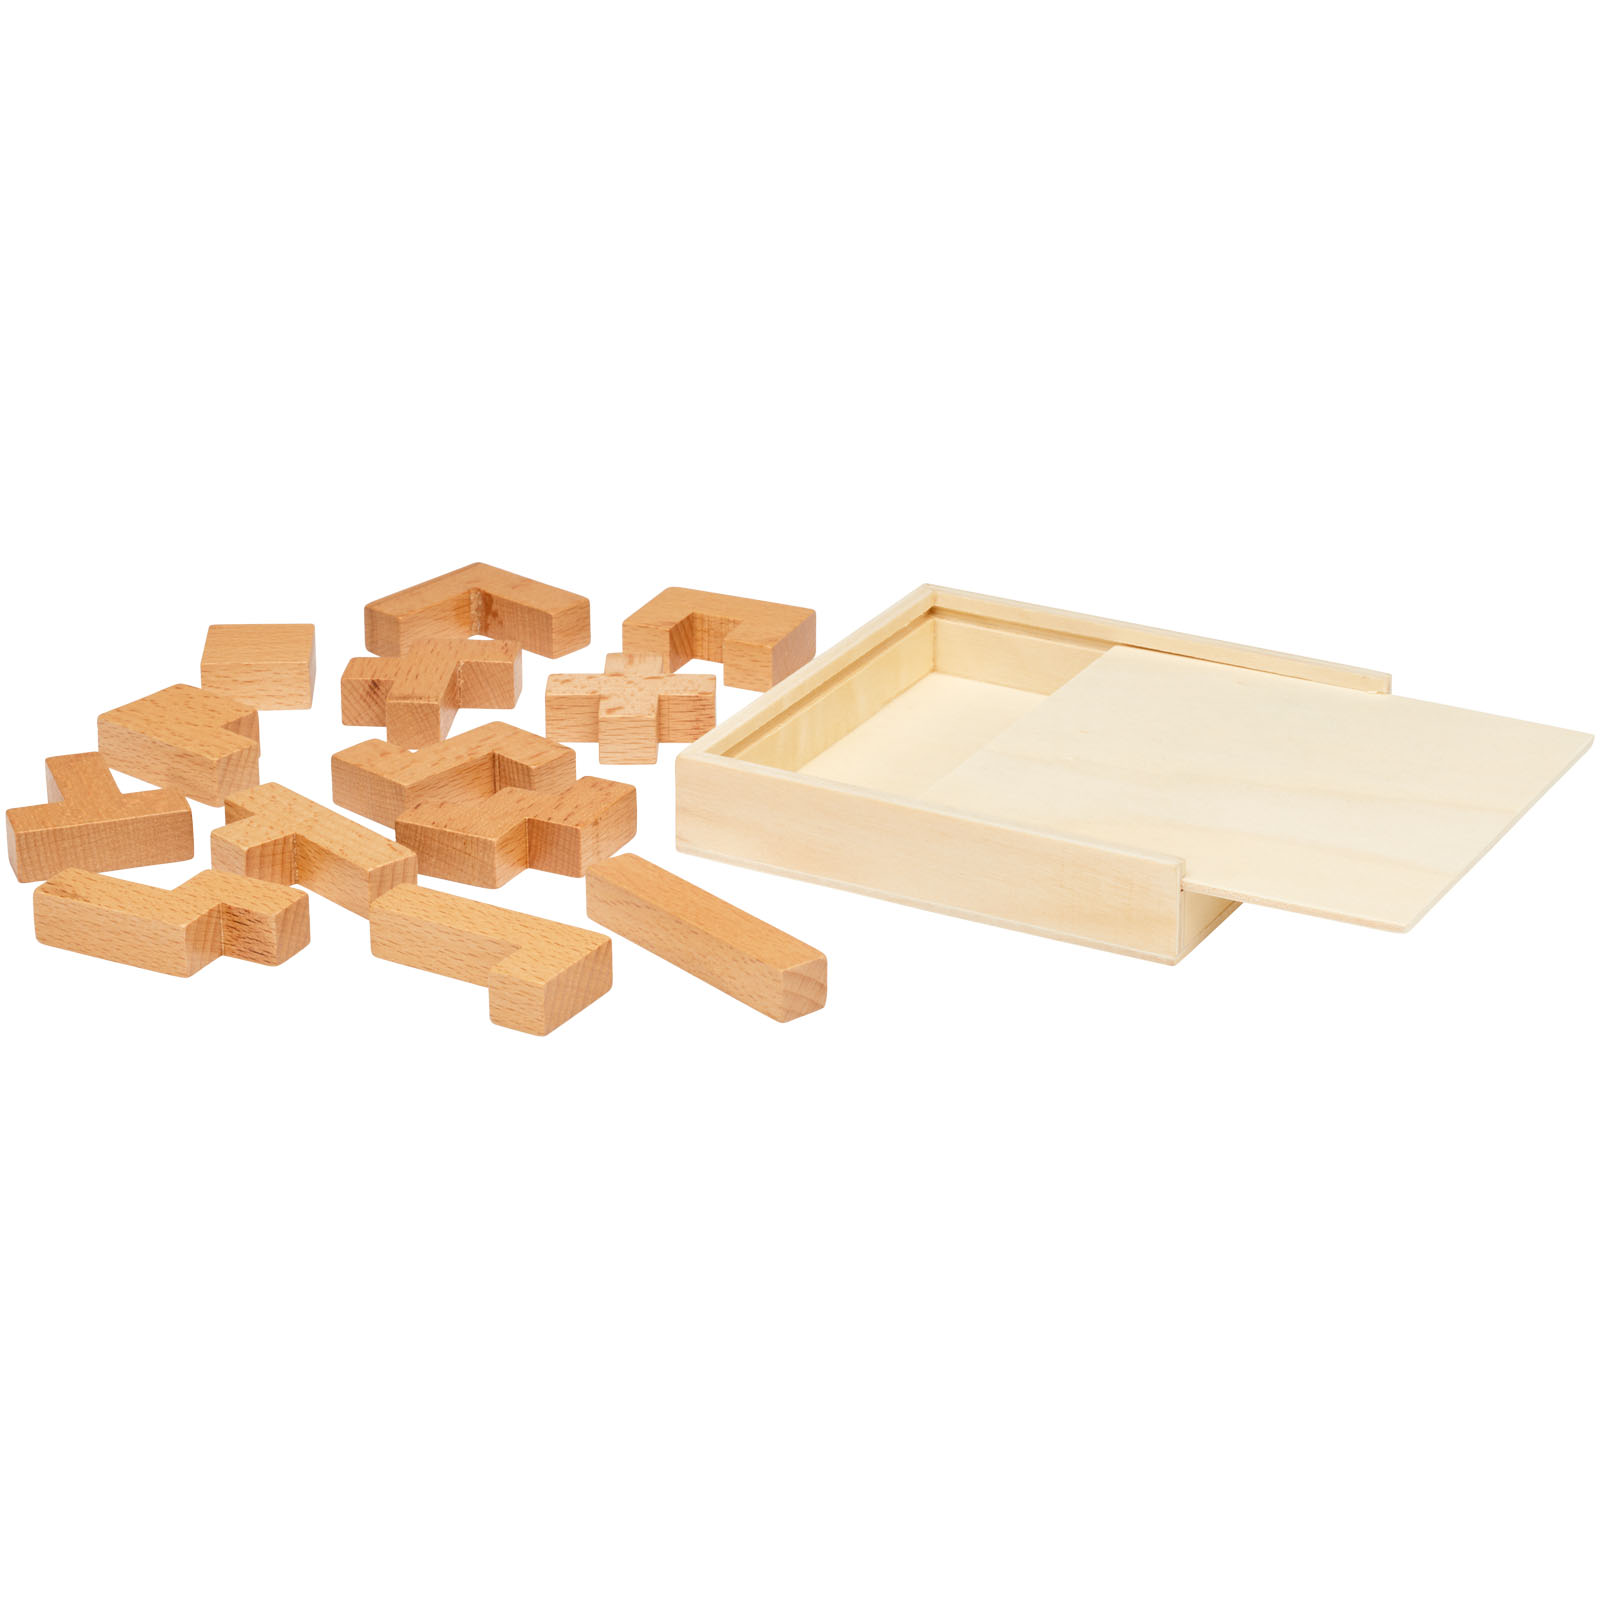 Toys & Games - Bark wooden puzzle